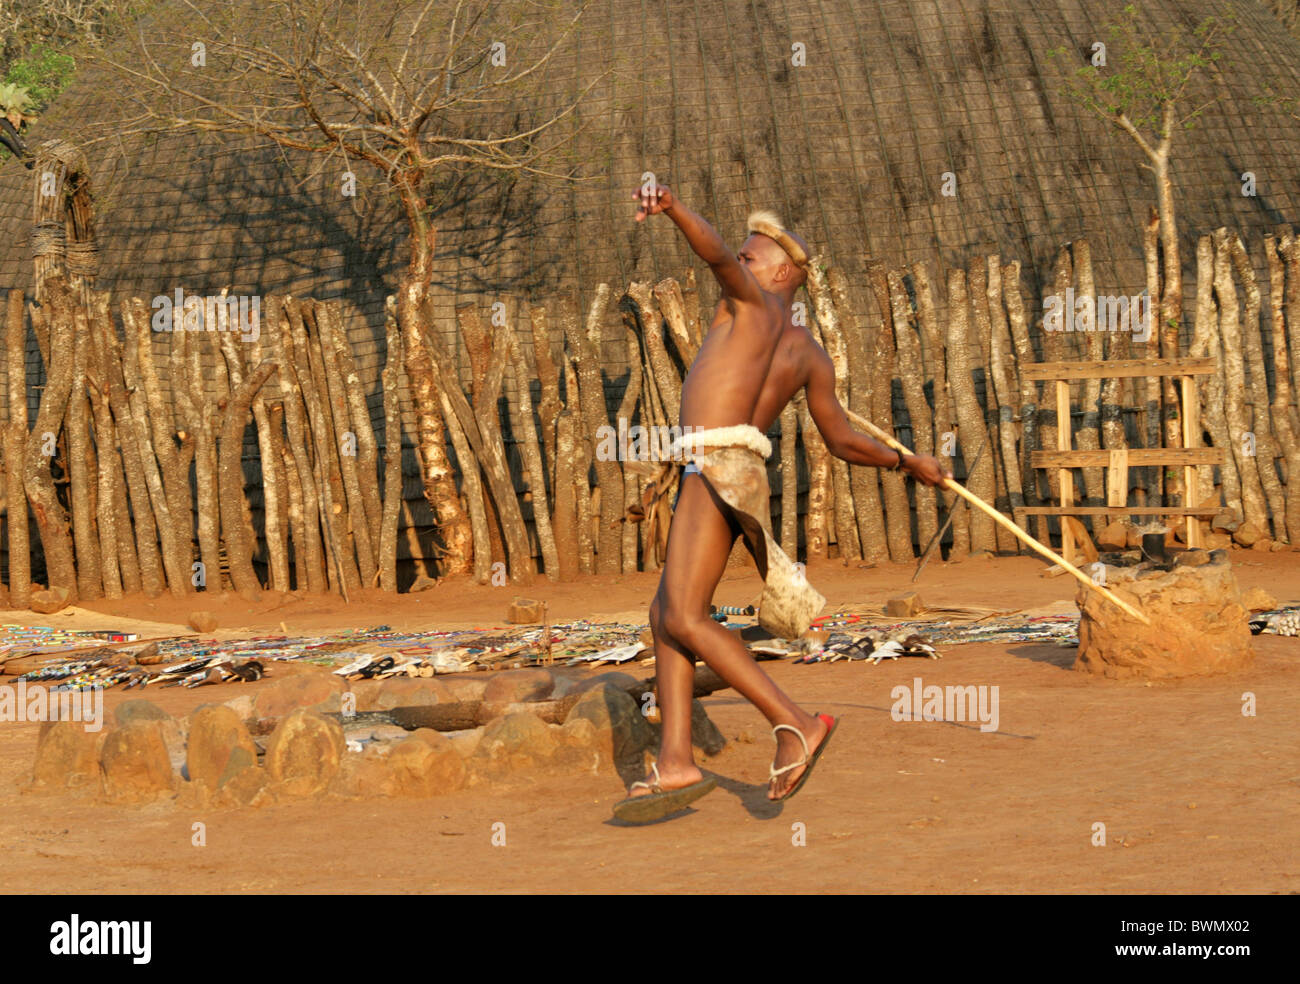 Zulu Cultural Village - Stick fighting and the high-kicking